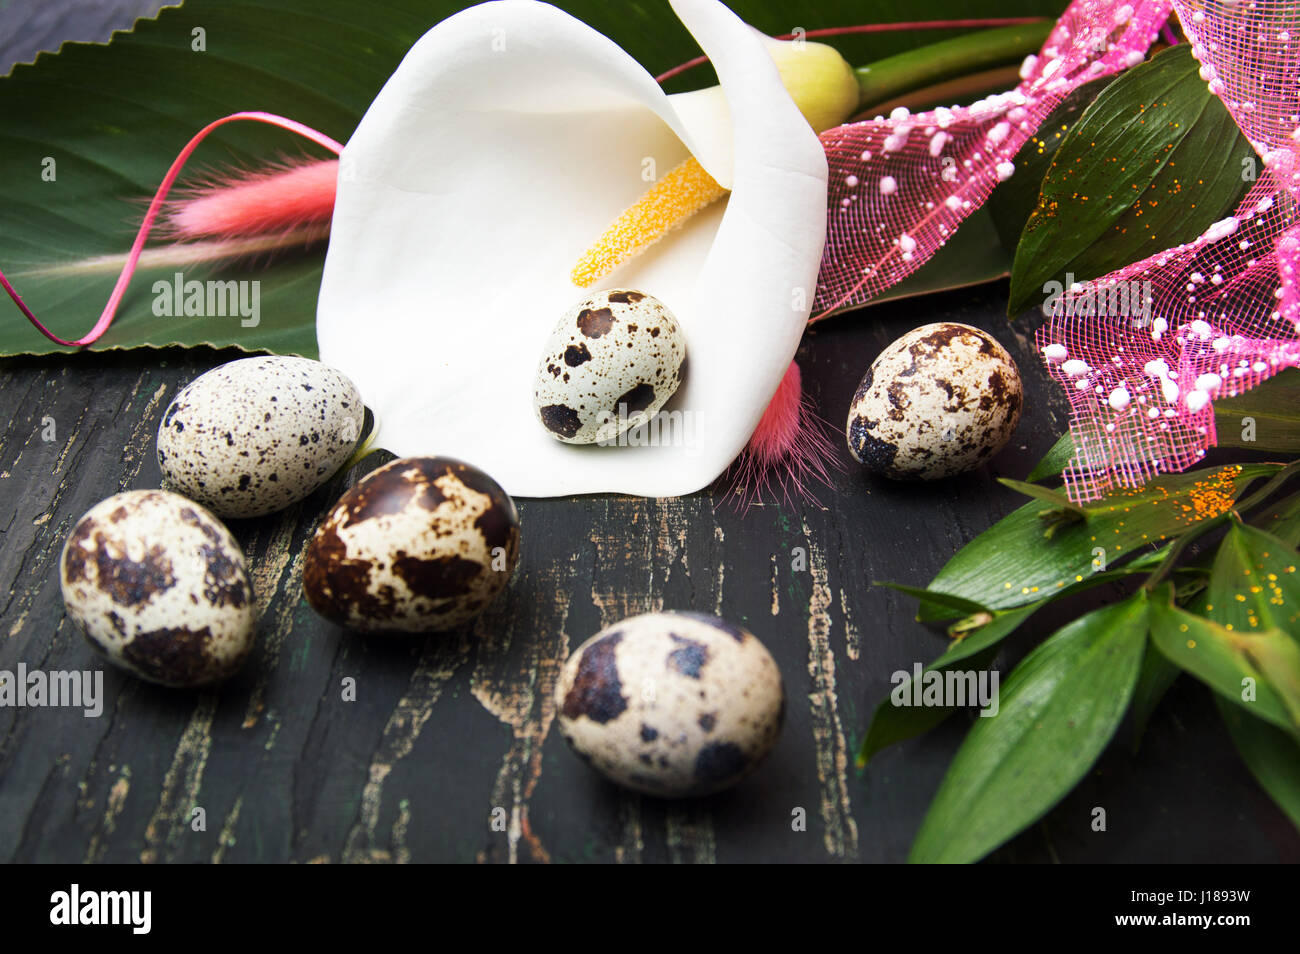 Calla Lily flower and fresh quail eggs on a table Stock Photo